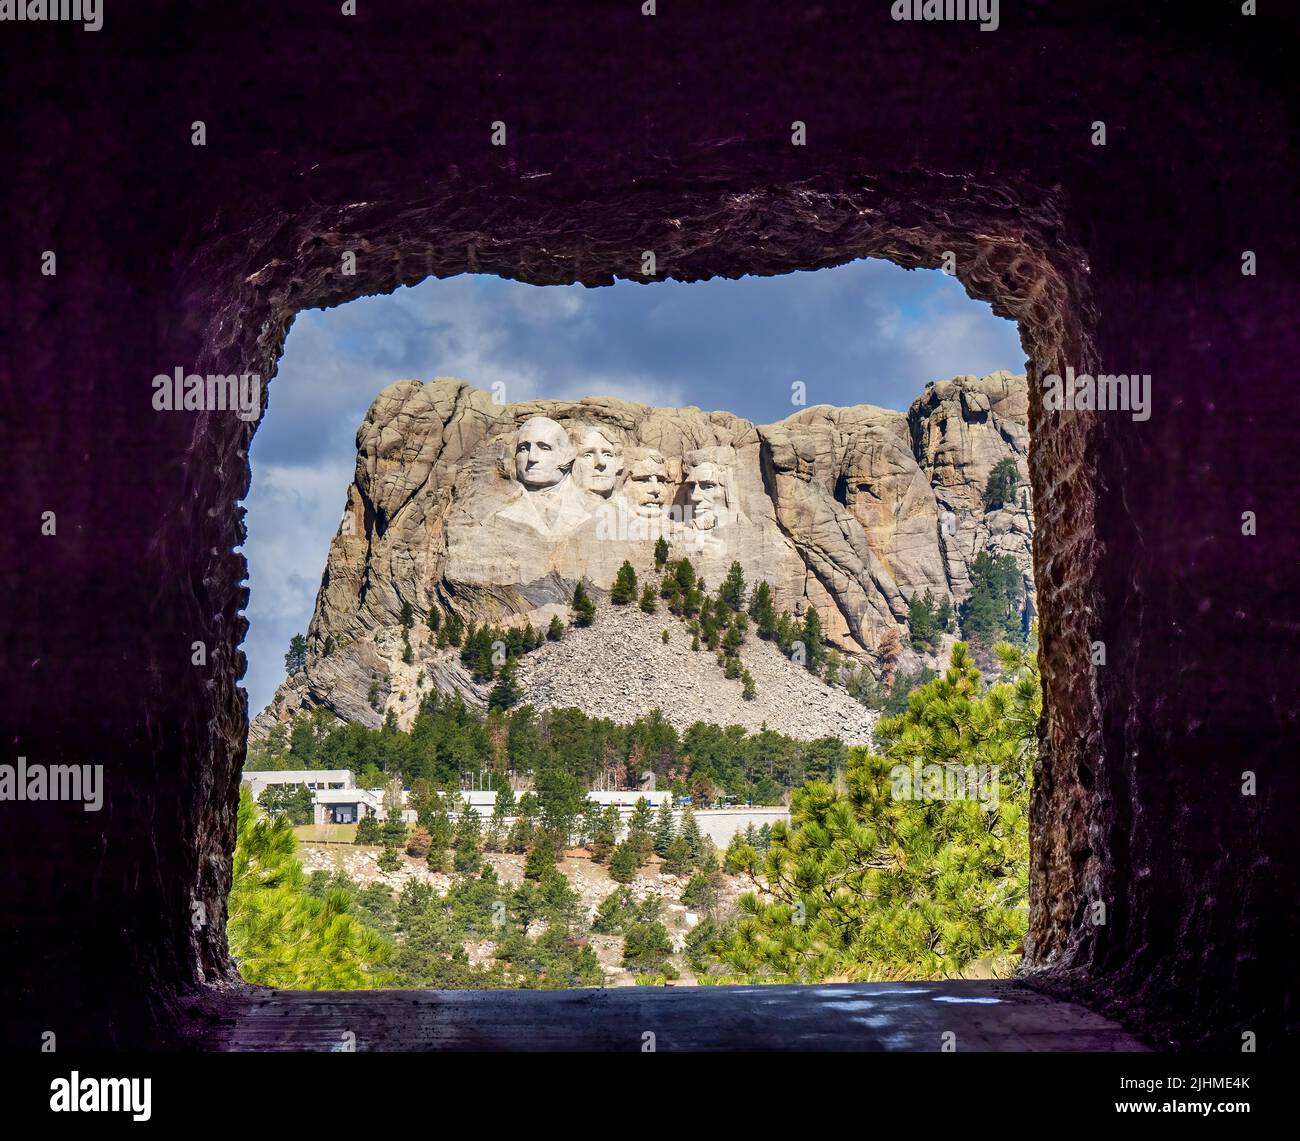 Mount Rushmore National Memorial though the Doane Robinson Tunnel on Iron MountaIn Road part of the Peter Norbeck Scenic National Byway in the Black H Stock Photo